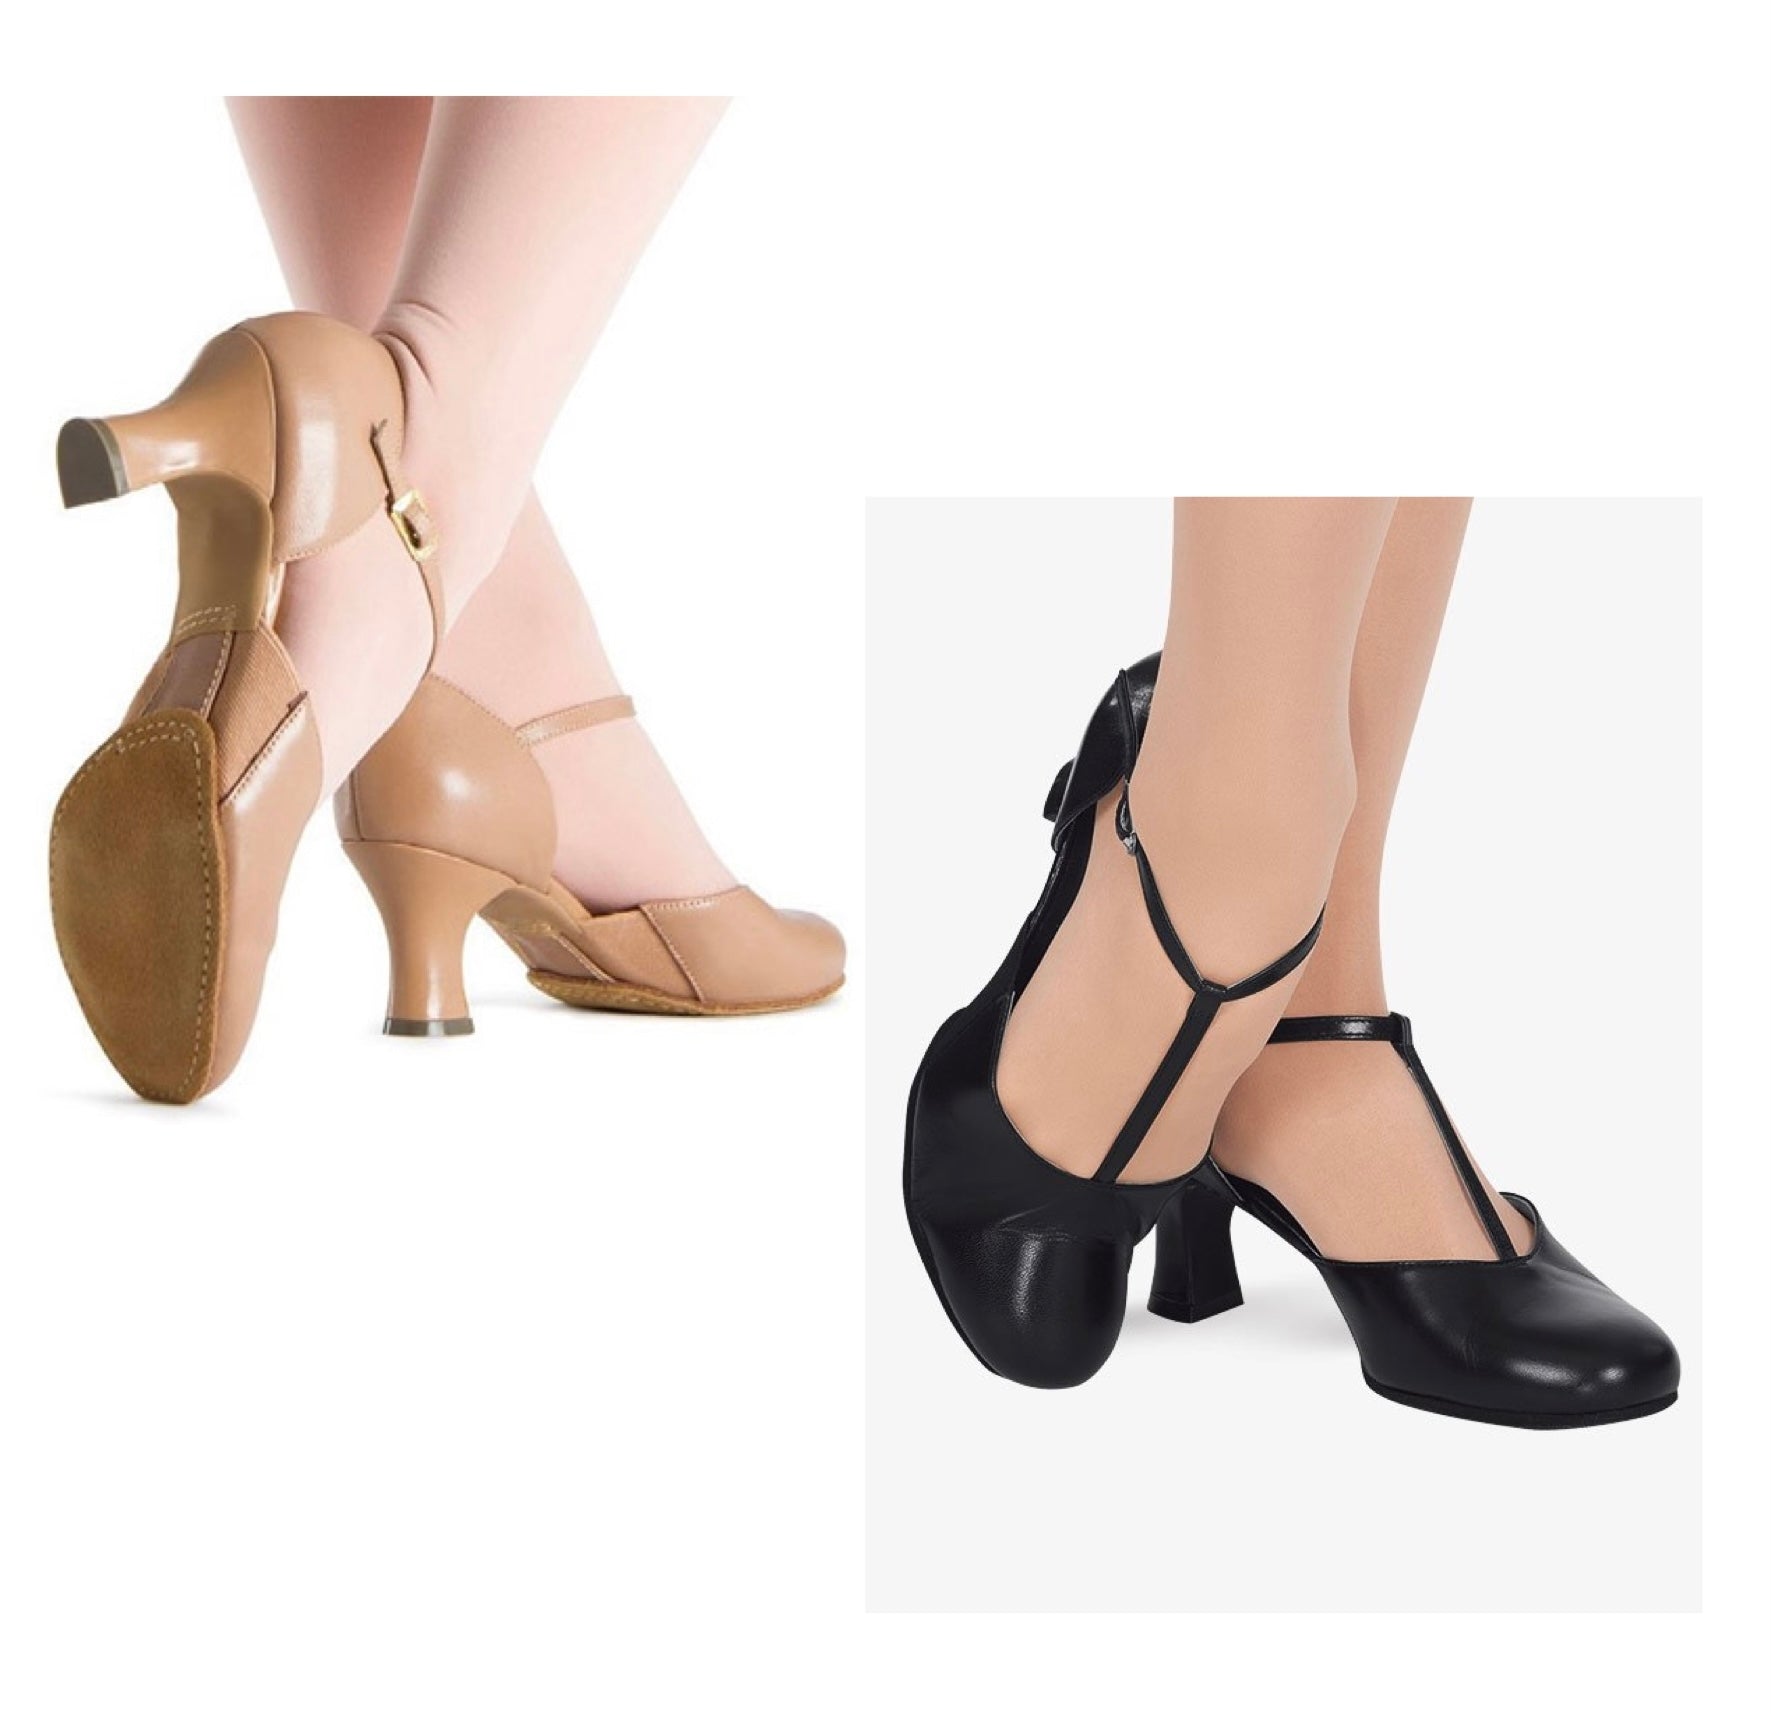 Best Heels For Women In India: Be The Fashionista You Always Dreamt About